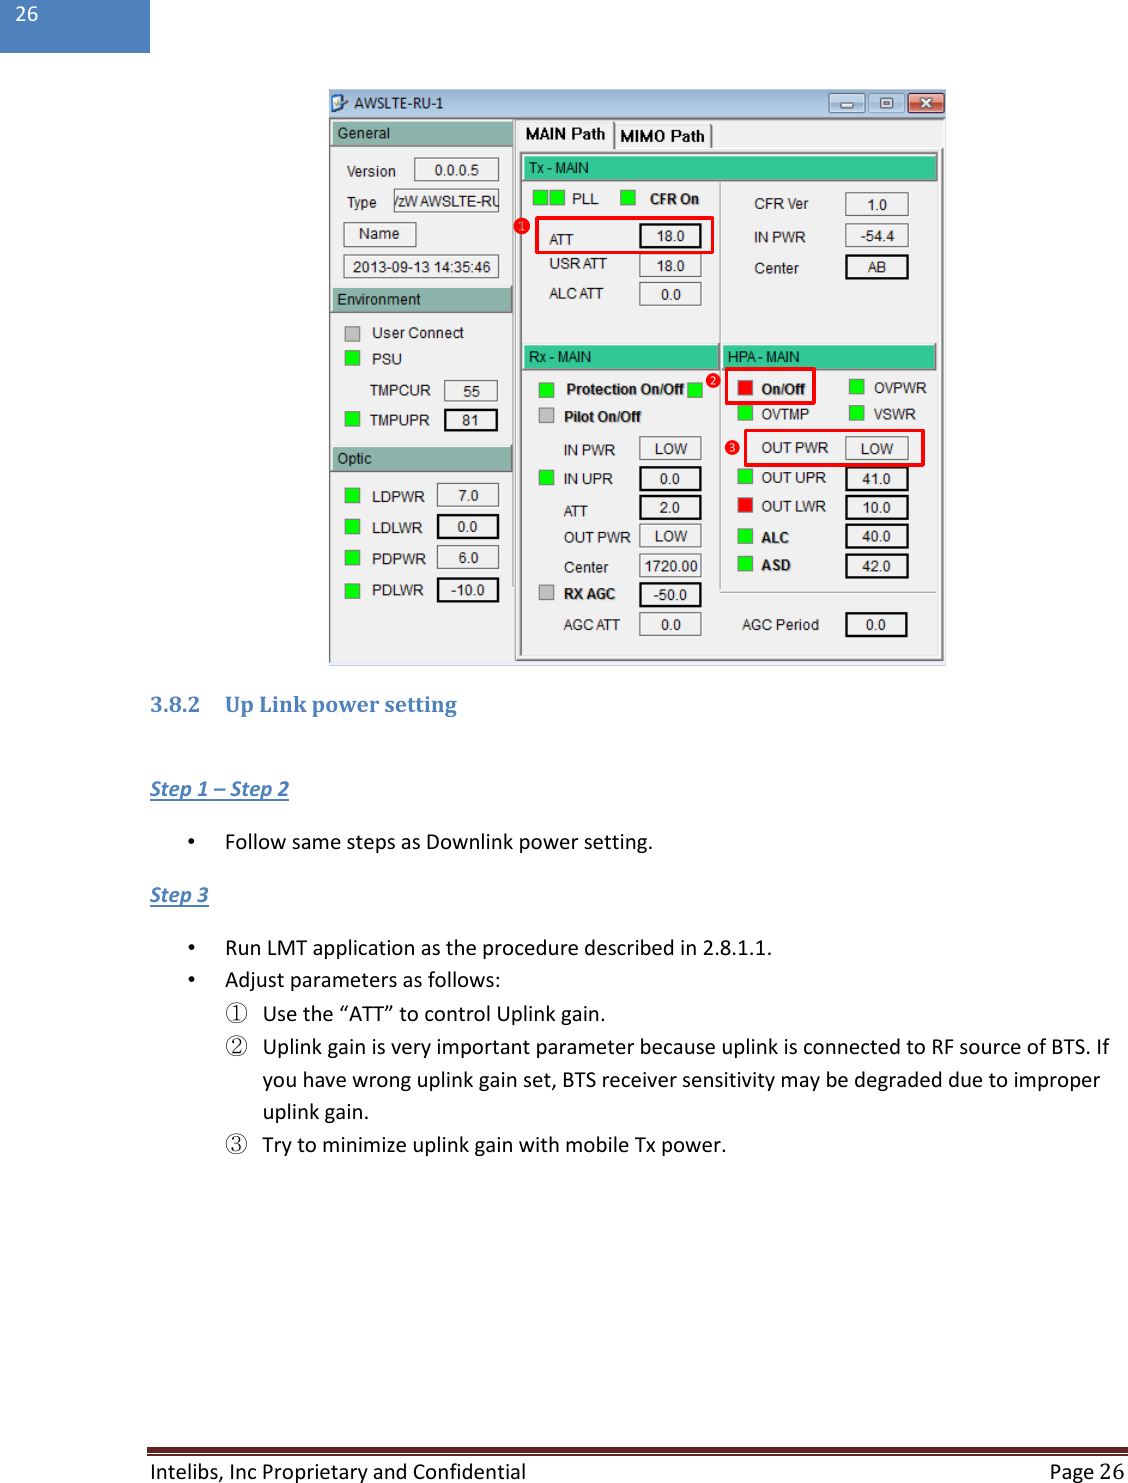  Intelibs, Inc Proprietary and Confidential  Page 26  26   3.8.2 Up Link power setting  •  Follow same steps as Downlink power setting. Step 1 – Step 2 •  Run LMT application as the procedure described in 2.8.1.1. Step 3  •  Adjust parameters as follows: ① Use the “ATT” to control Uplink gain. ② Uplink gain is very important parameter because uplink is connected to RF source of BTS. If you have wrong uplink gain set, BTS receiver sensitivity may be degraded due to improper uplink gain. ③ Try to minimize uplink gain with mobile Tx power.  ❶❷❸